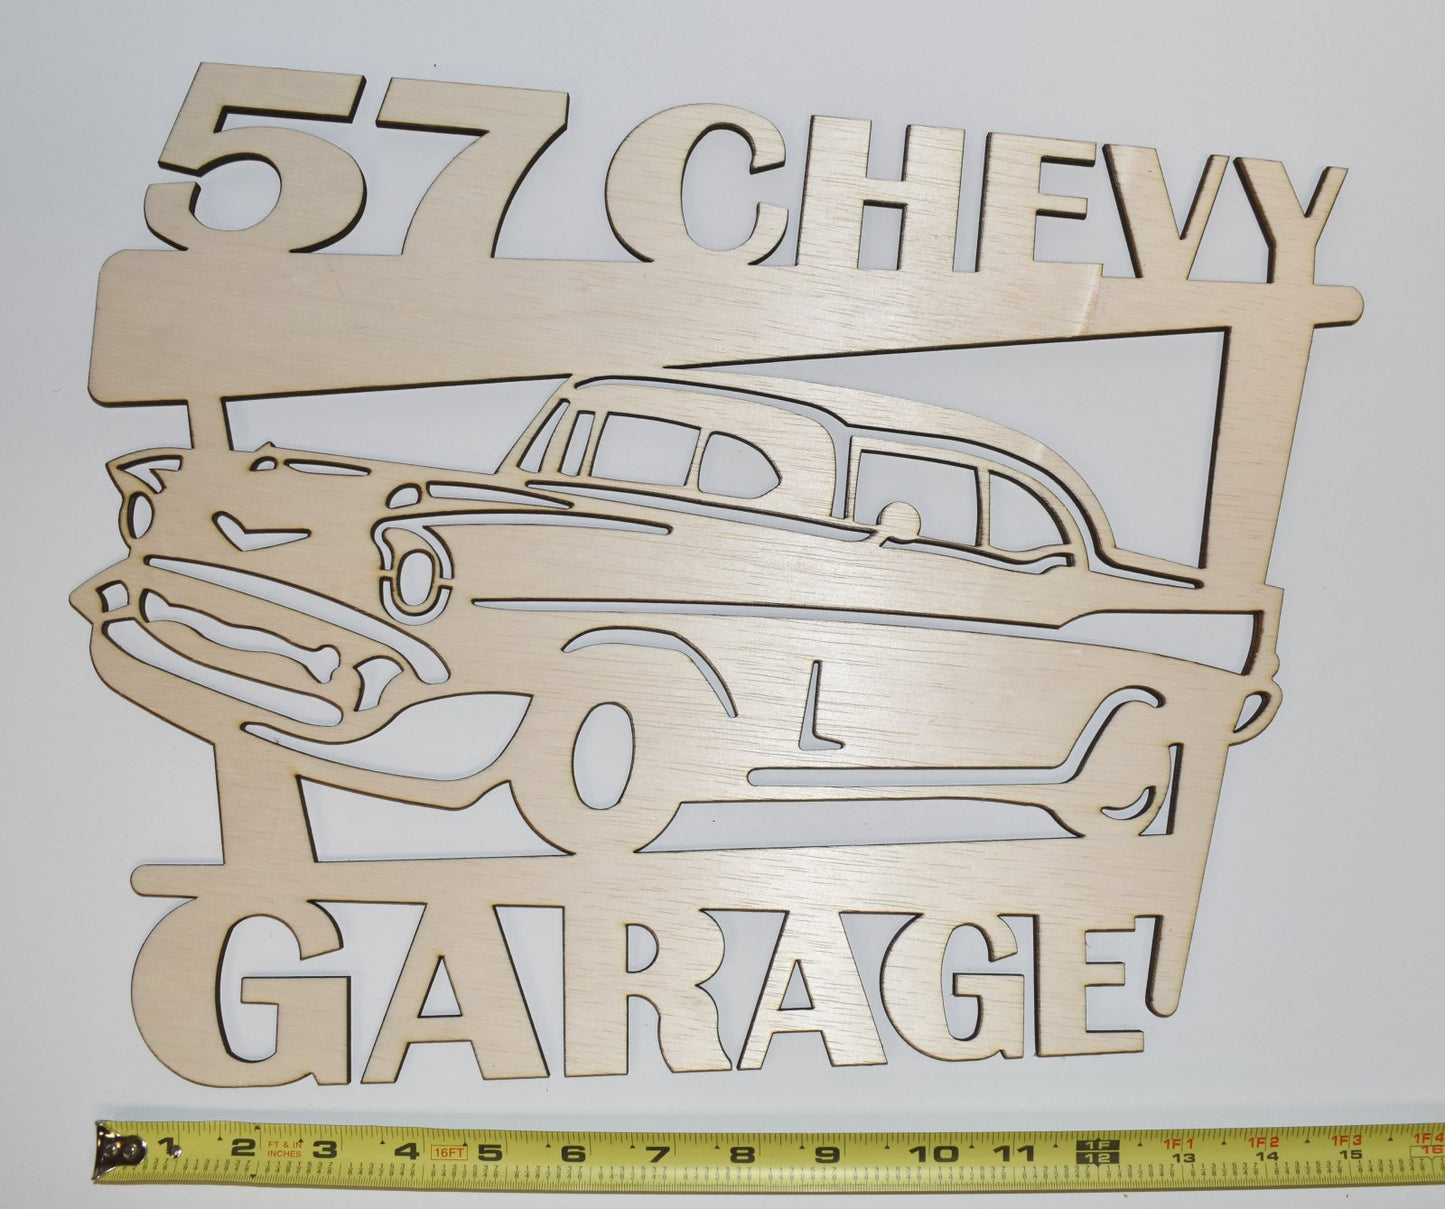 57 Chevy Garage Detailed Wood Sign Wooden Hanging Decor Made In USA LA154-WL